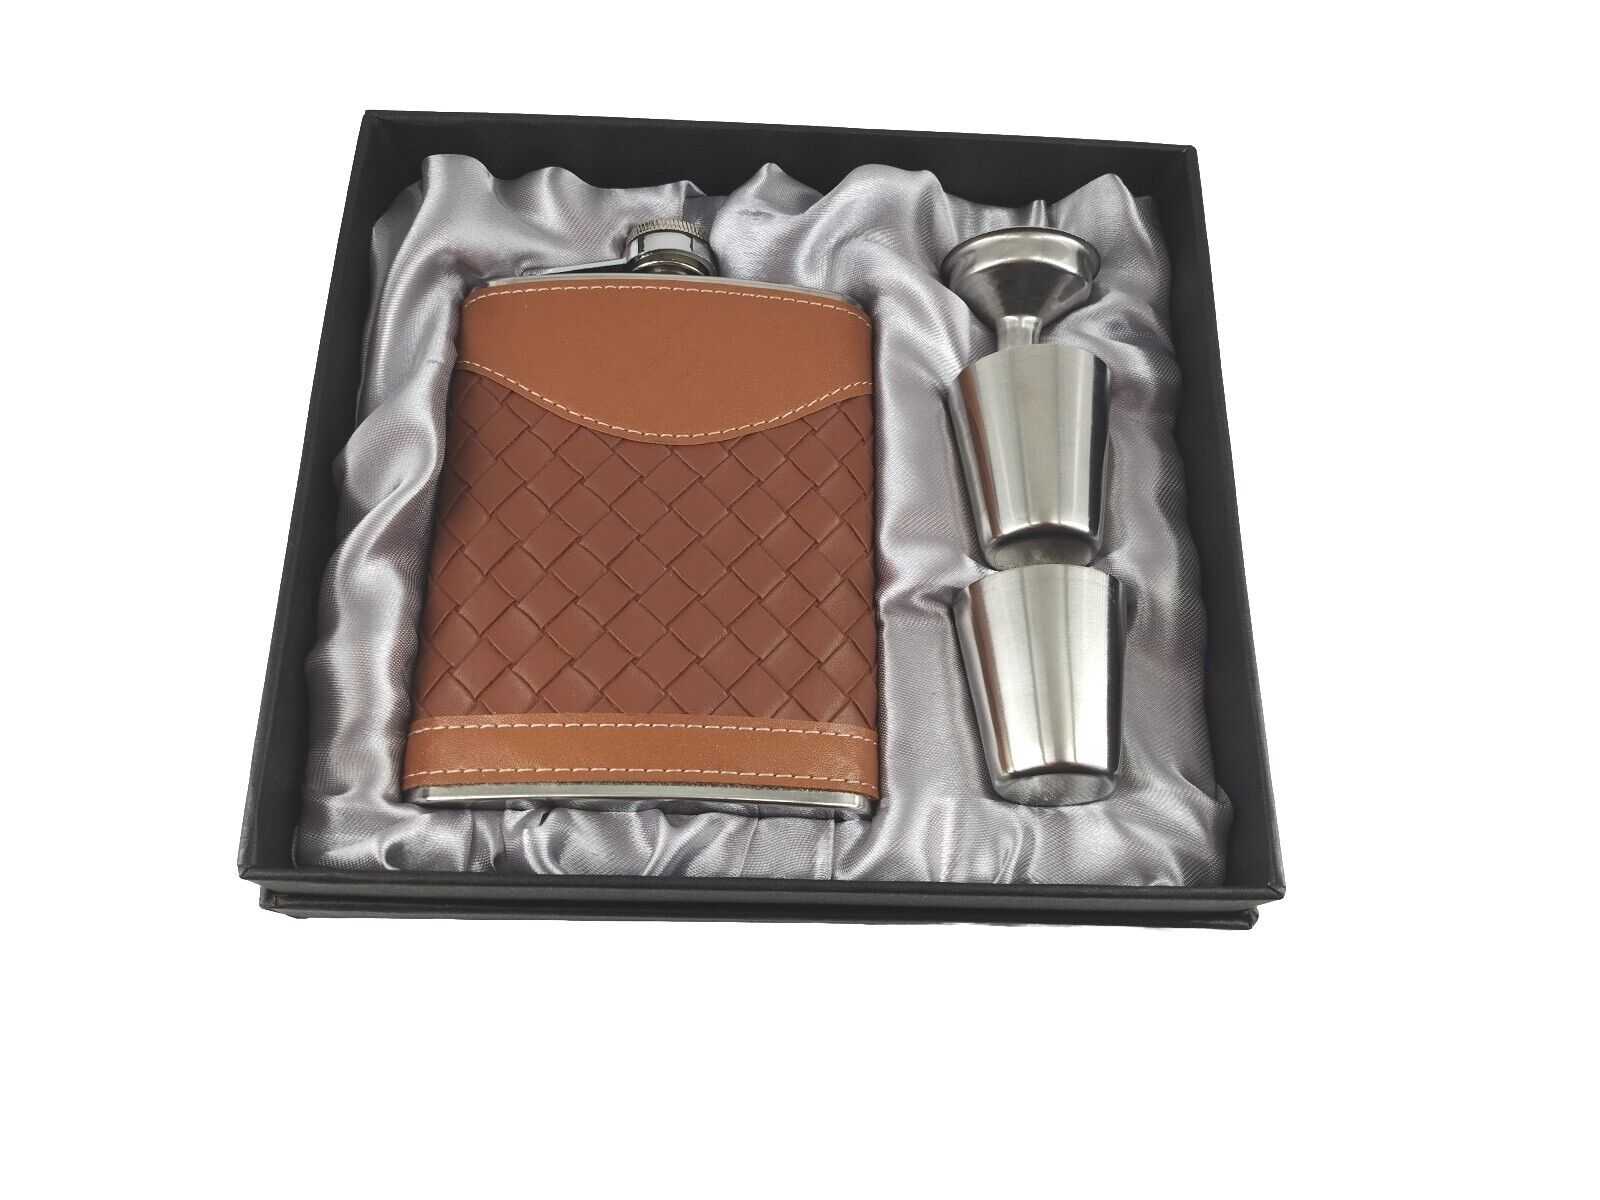  STAINLESS STEEL 8 Oz FLASK FUNNEL & 2 Shot Glasses Brown Leather Design NIB